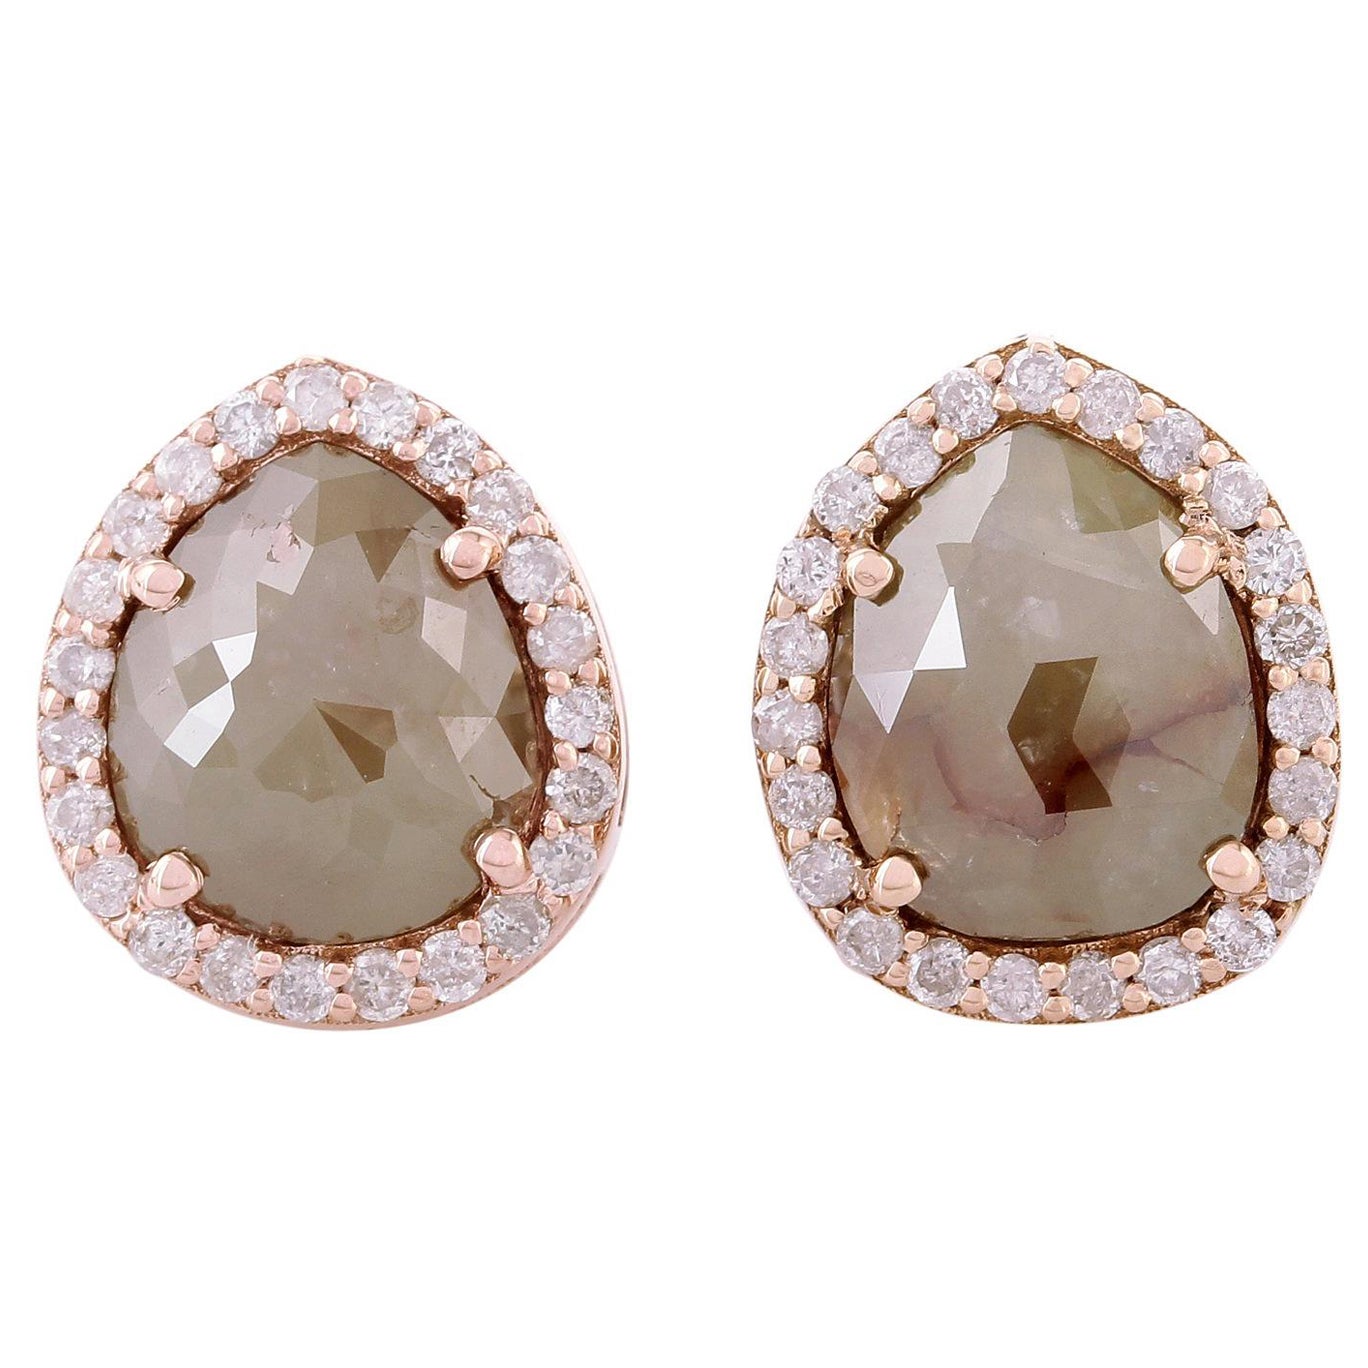 Ice Diamond Studs With Pave Diamonds Made in 18k Gold